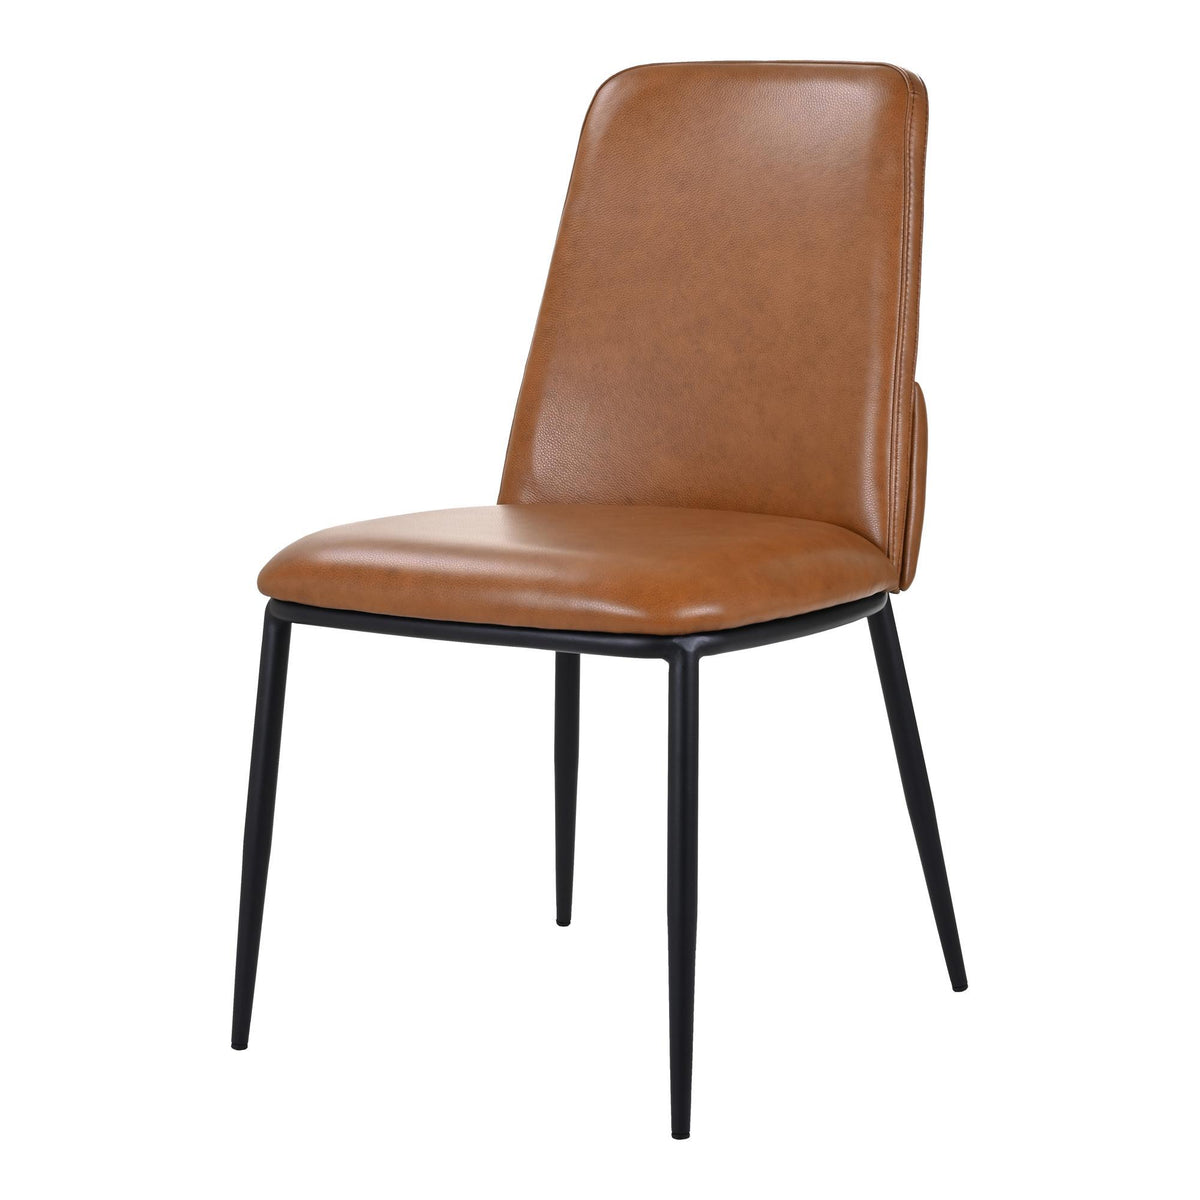 Moe's Home Collection Douglas Dining Chair Brown - EQ-1017-03